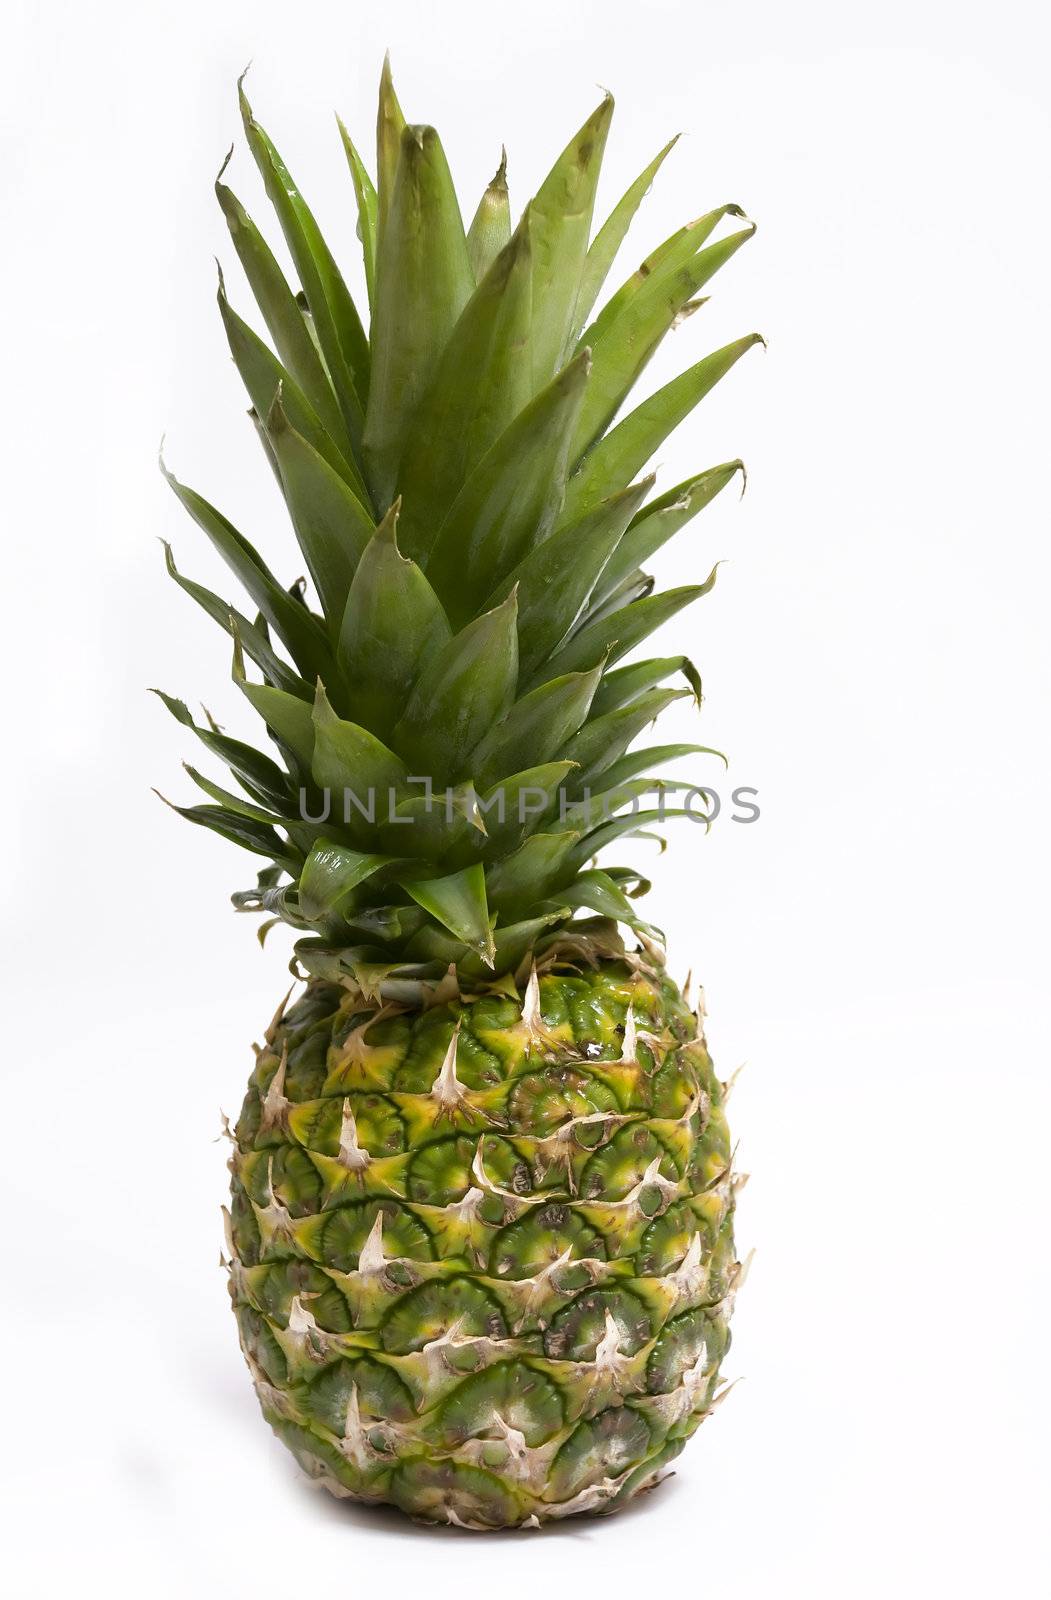 lovely, small, organic pineapple just waiting to be eaten